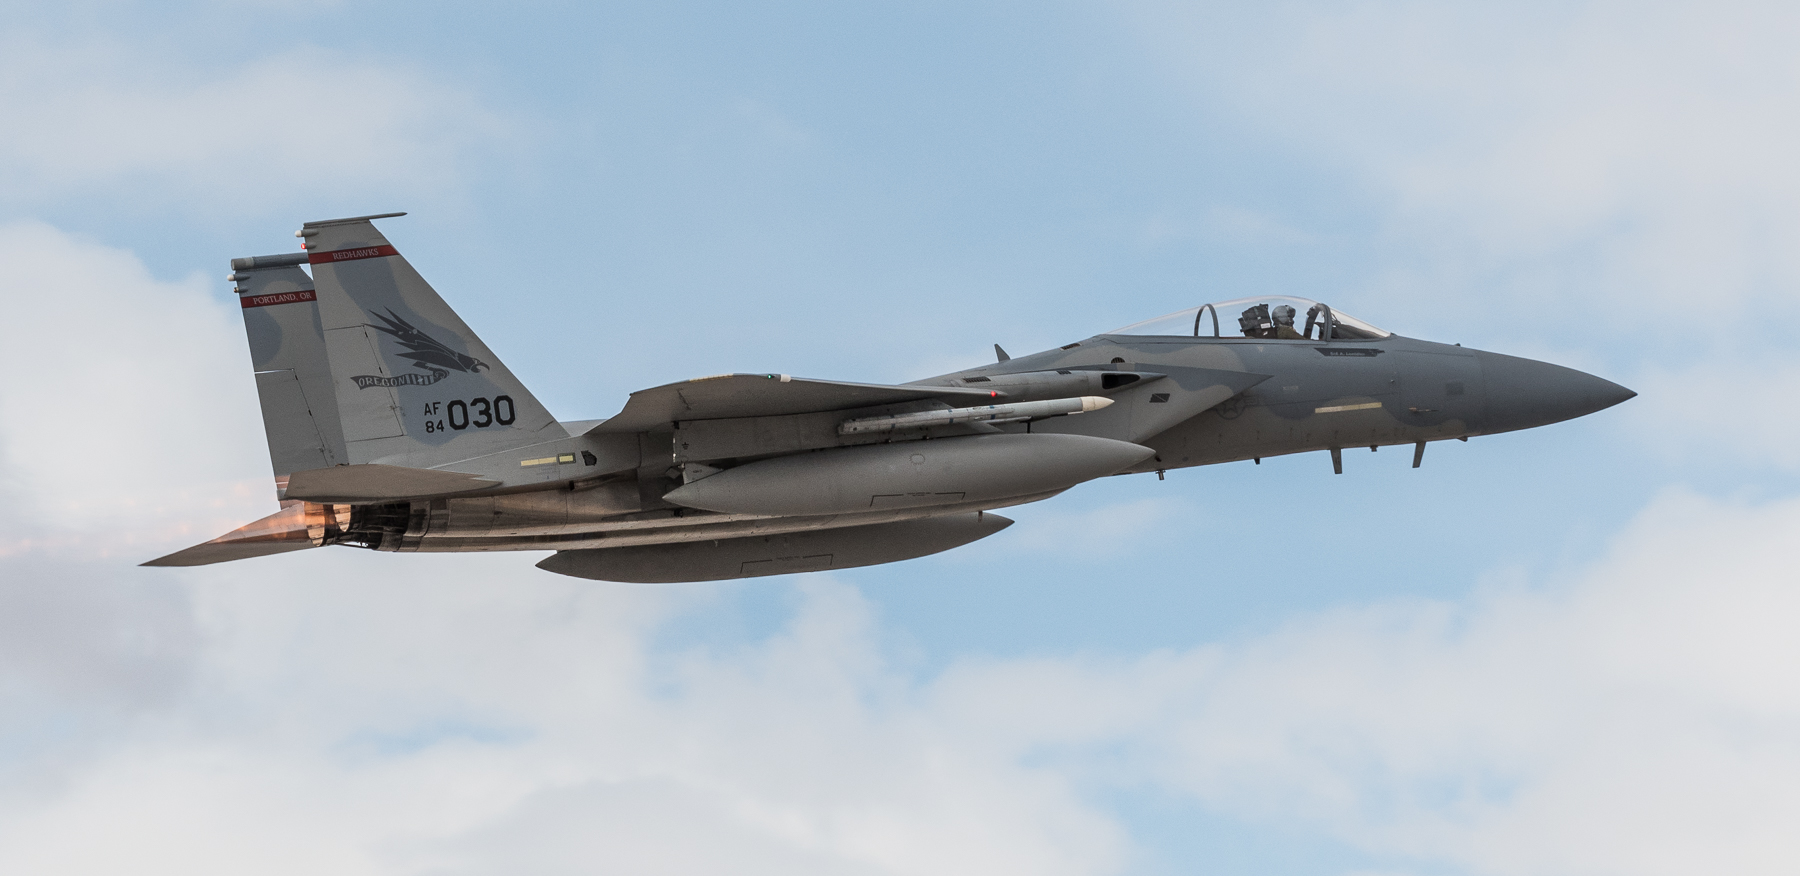 Exercise Red Flag 18-1 Nellis Air Force Base